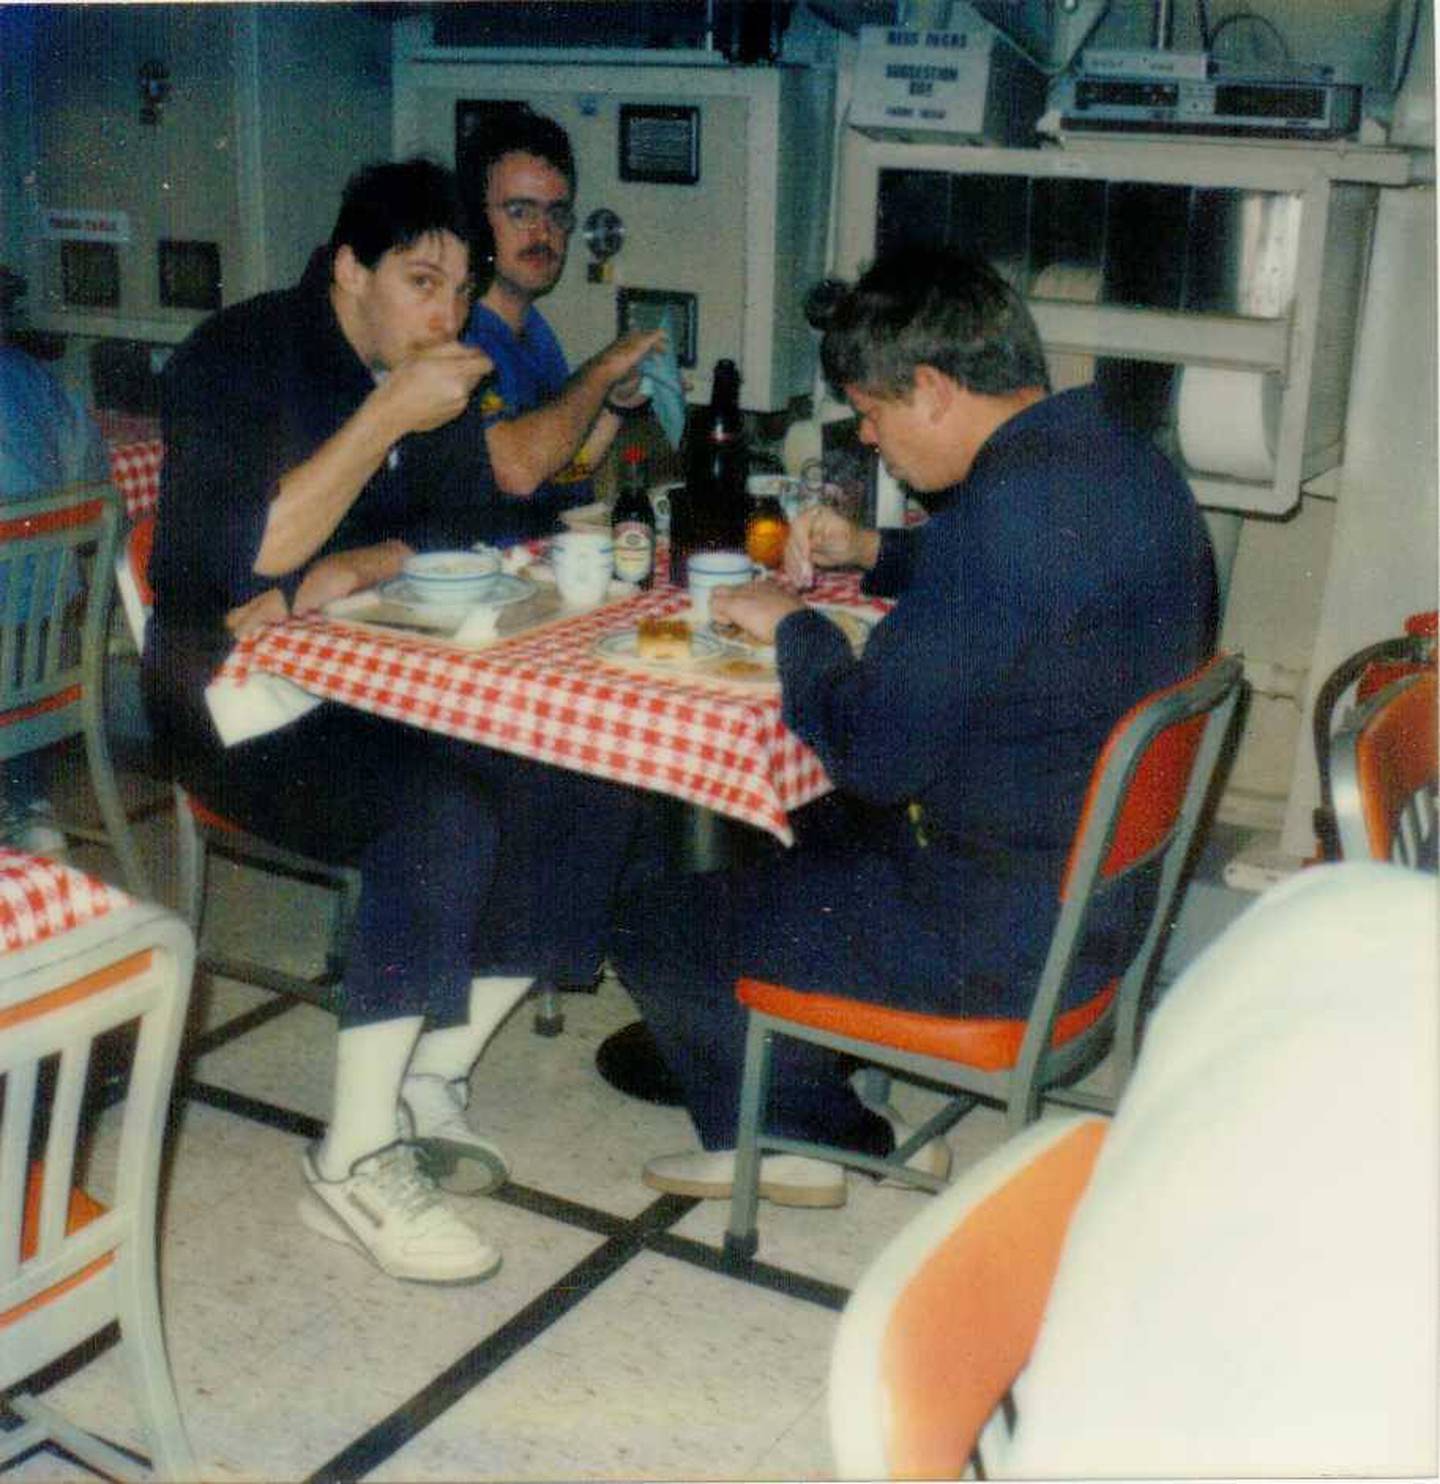 In 1988, forks began to disappear in the USS Nevada, thanks to a prank cooked up by David Chetlain and partner in mischief Jim Gover.